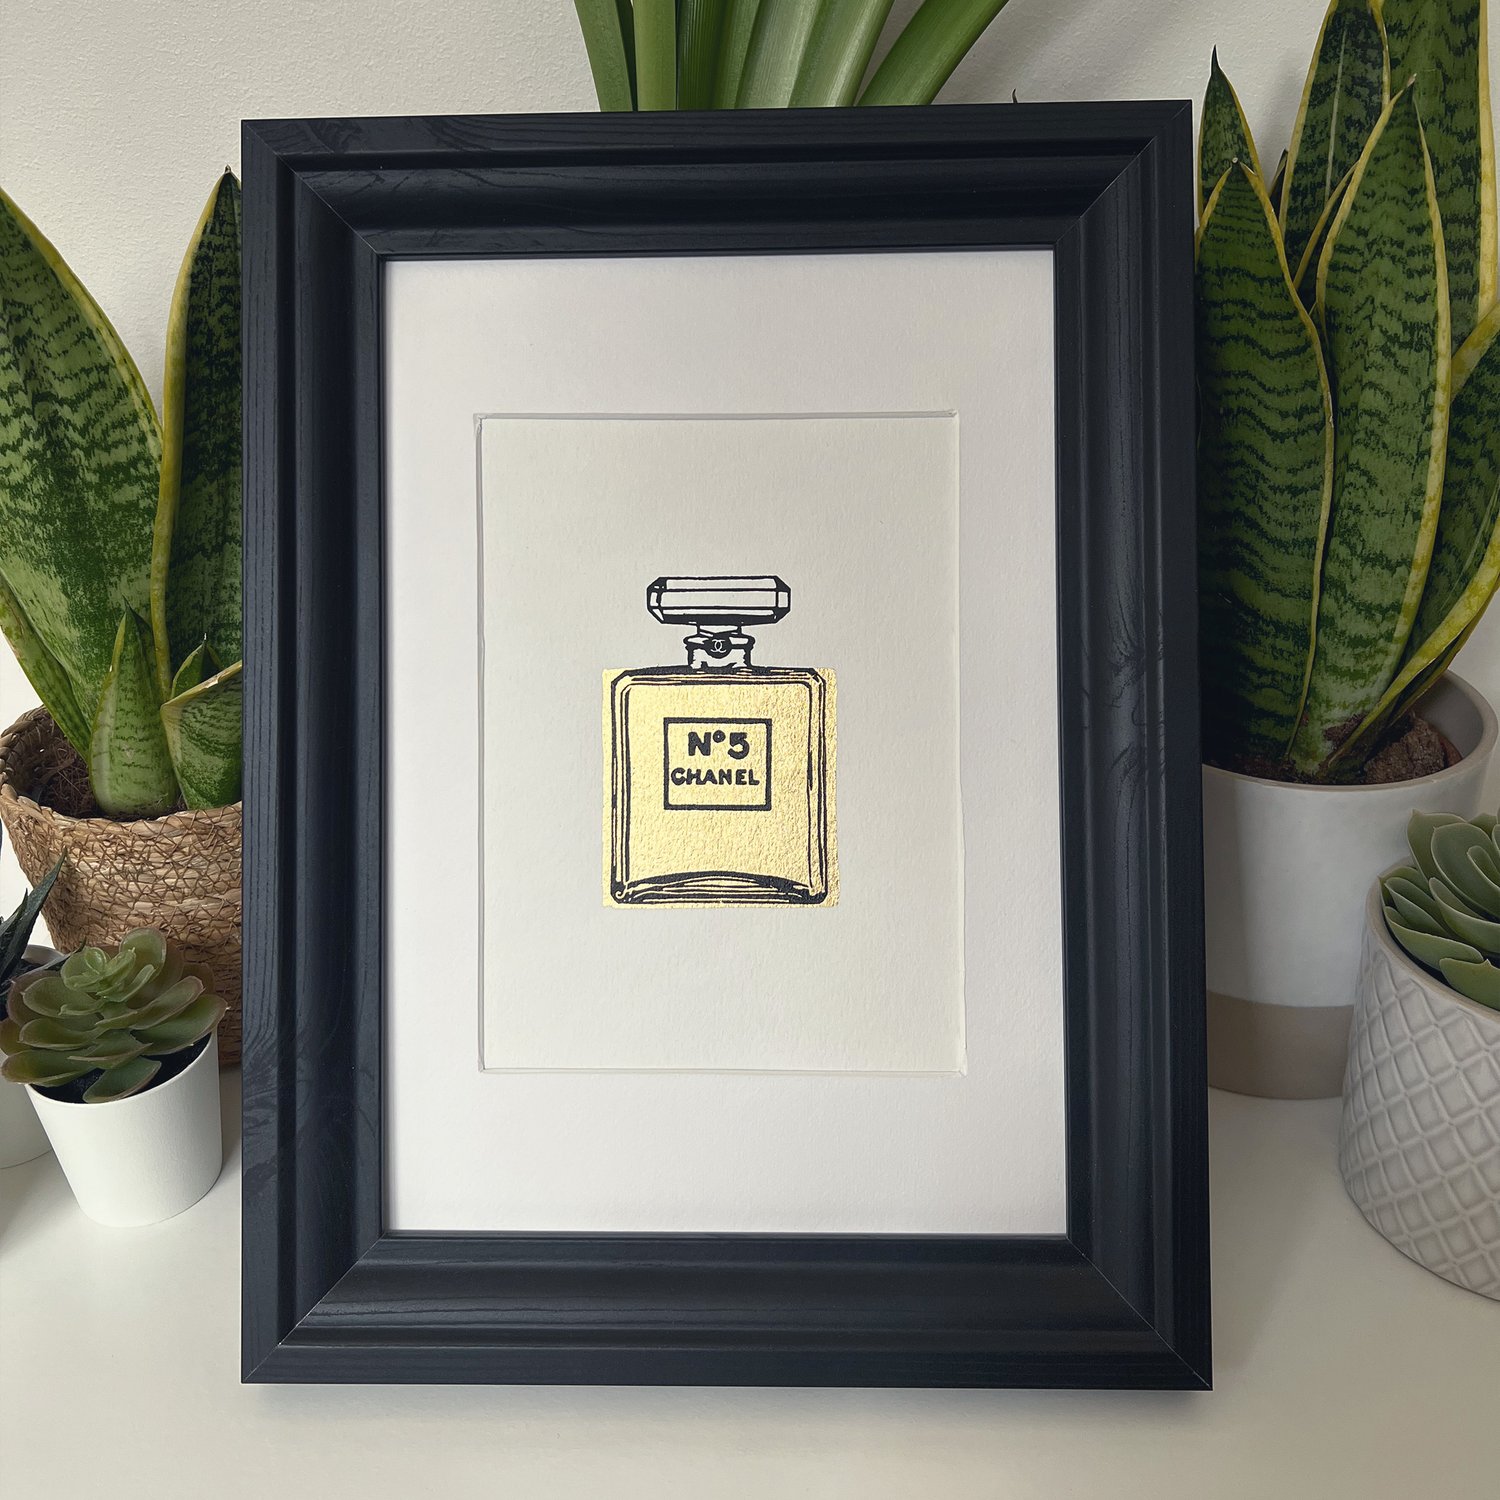 Chanel No. 5 gold print — Limited edition gilded linocut print — (A4/Unframed)